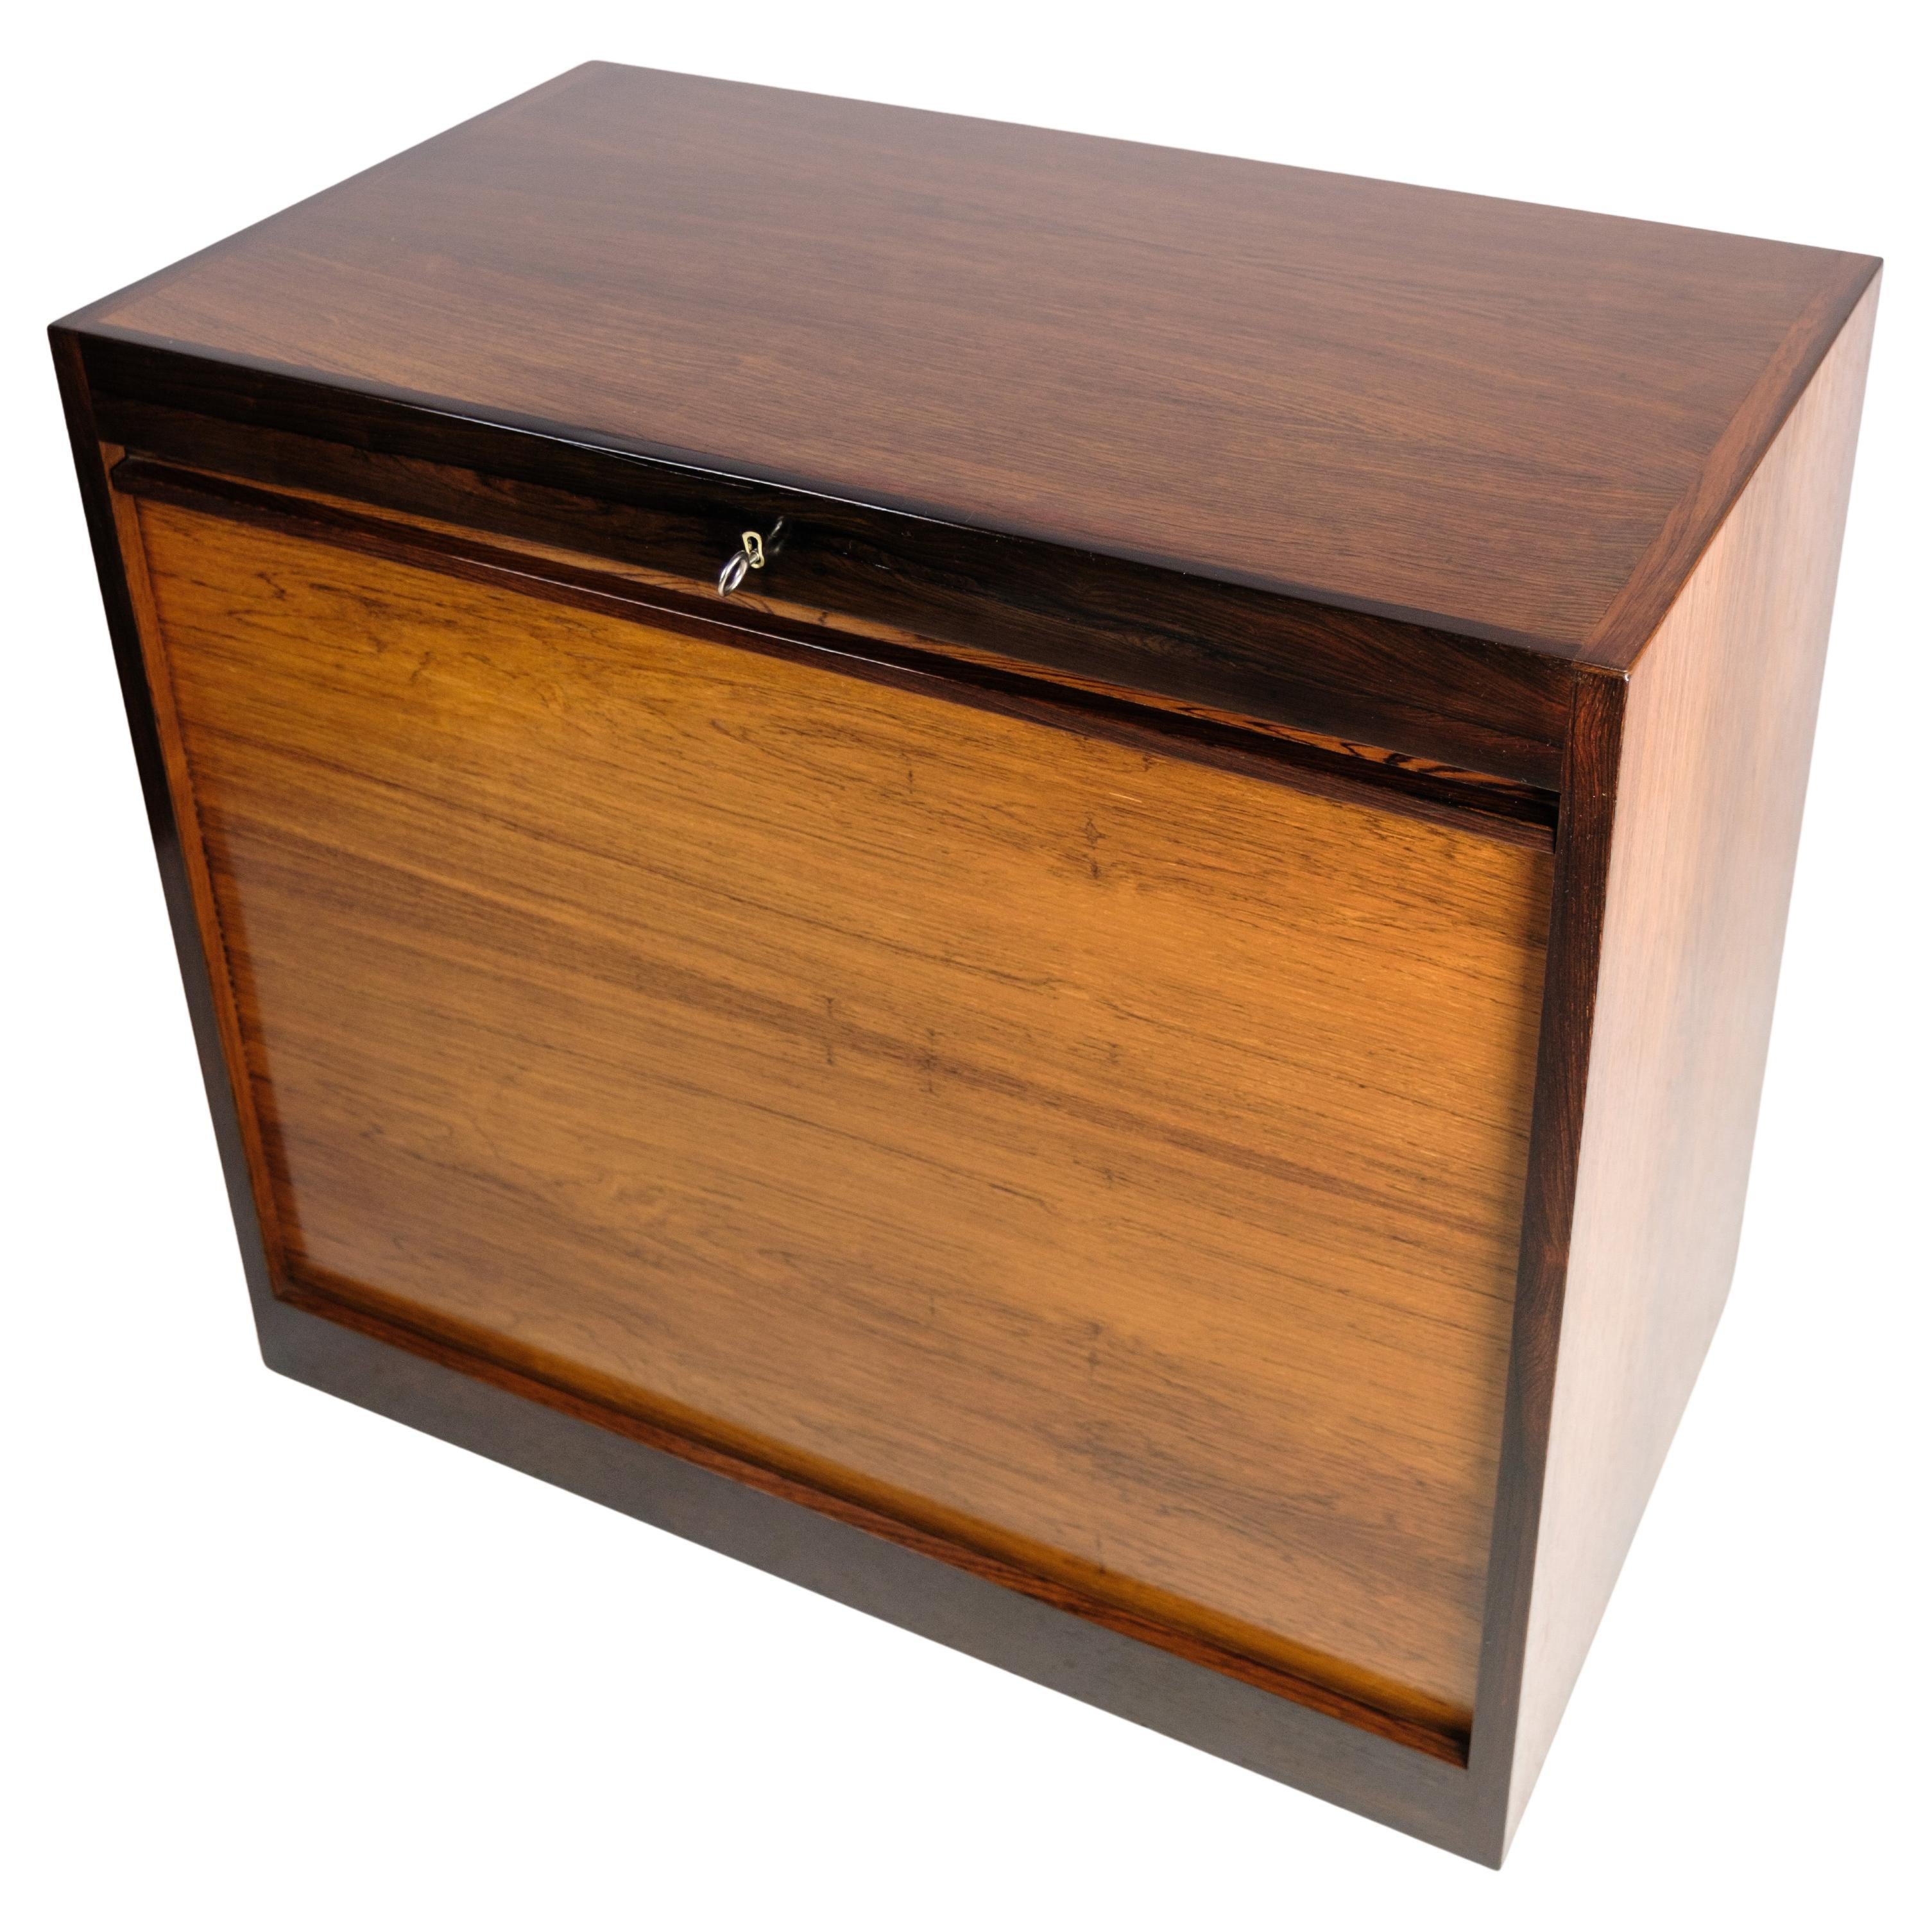 Cabinet with Pull-Up Door in Rosewood of Danish Design from the 1960s For Sale